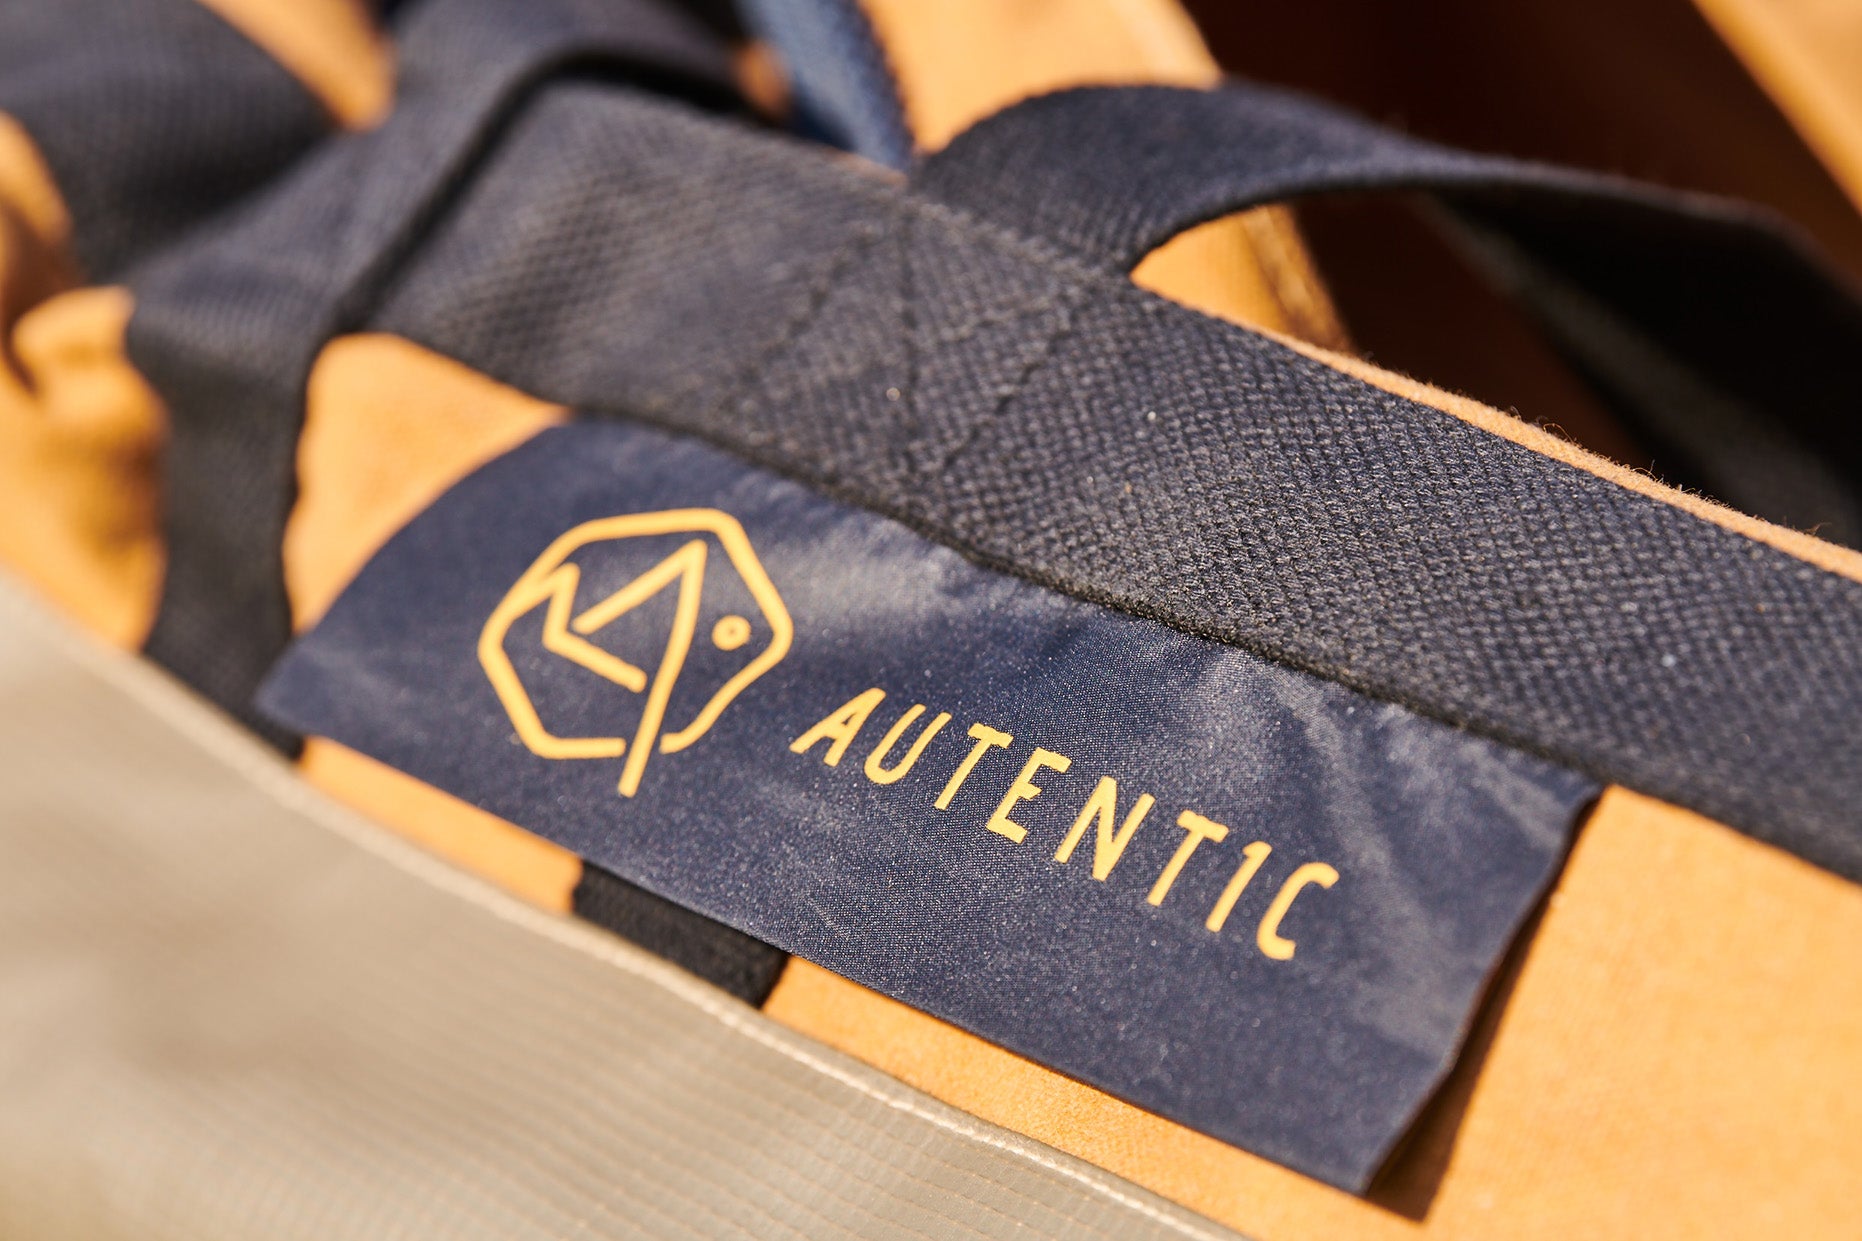 Beyond tents glamping autentic tents packaging